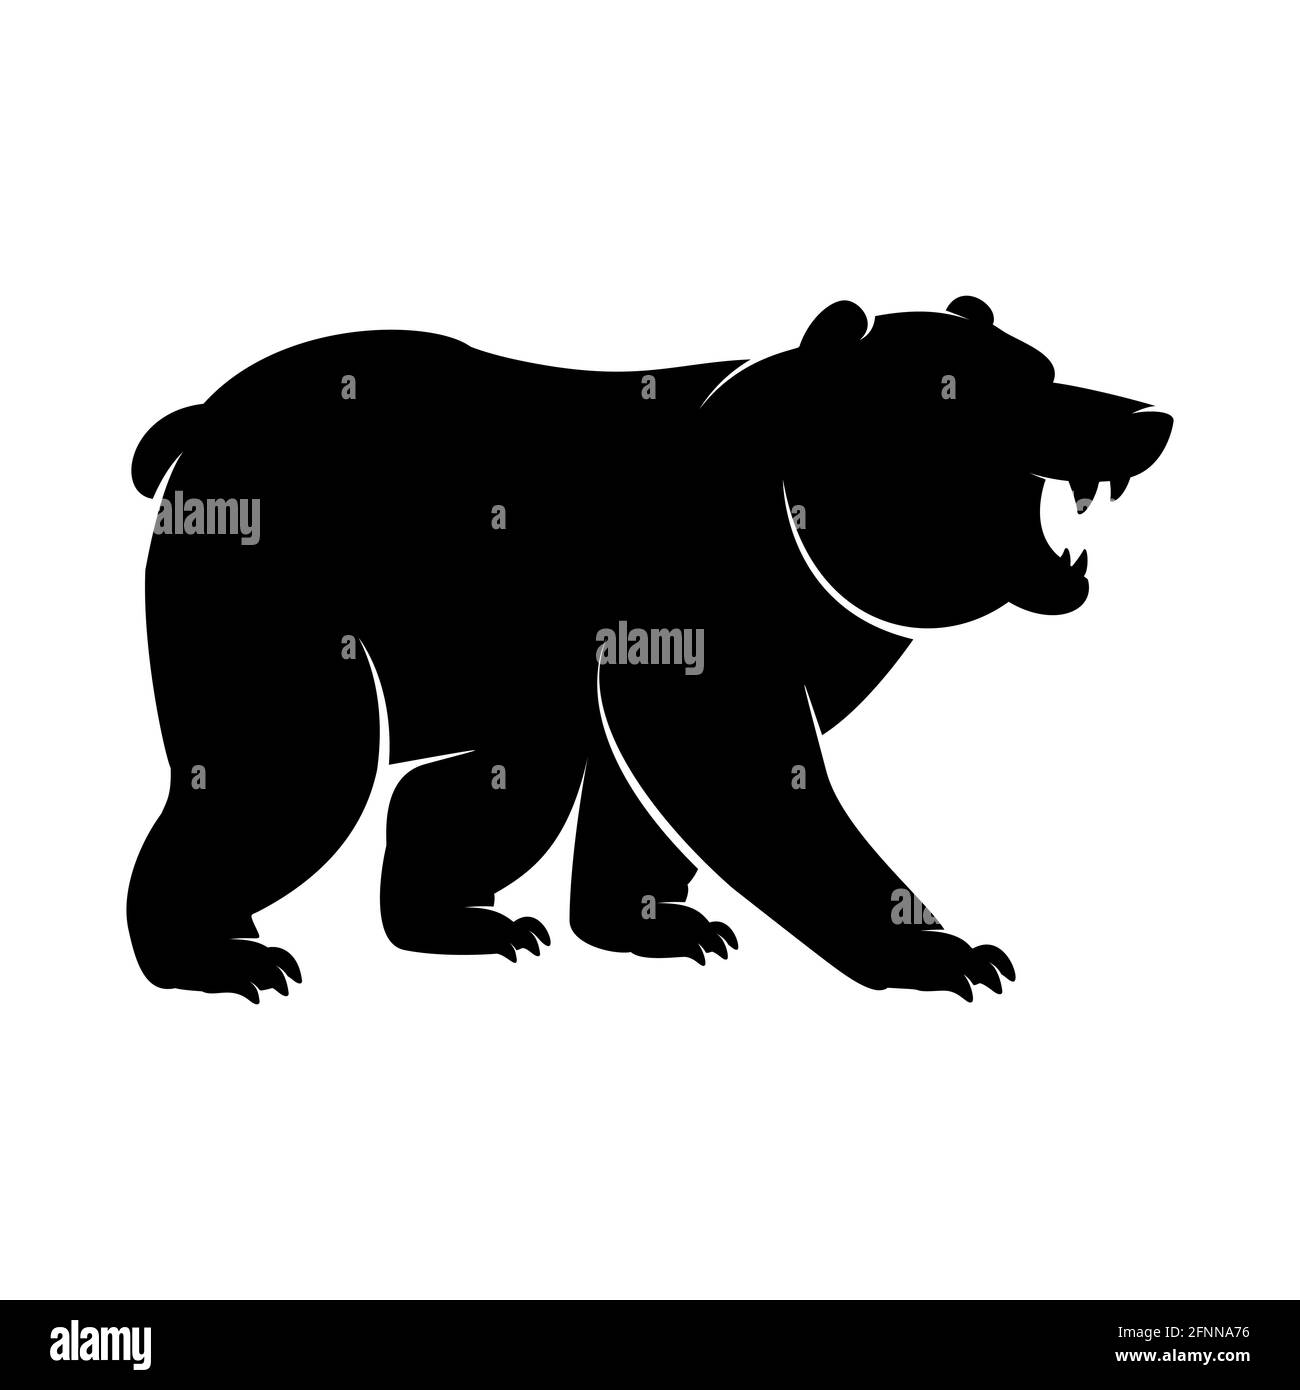 Black Silhouette of a standing and roaring Bear icon. Vector illustration of an angry monochrome arctic animal, polar bear or Grizzly logo with big cl Stock Vector